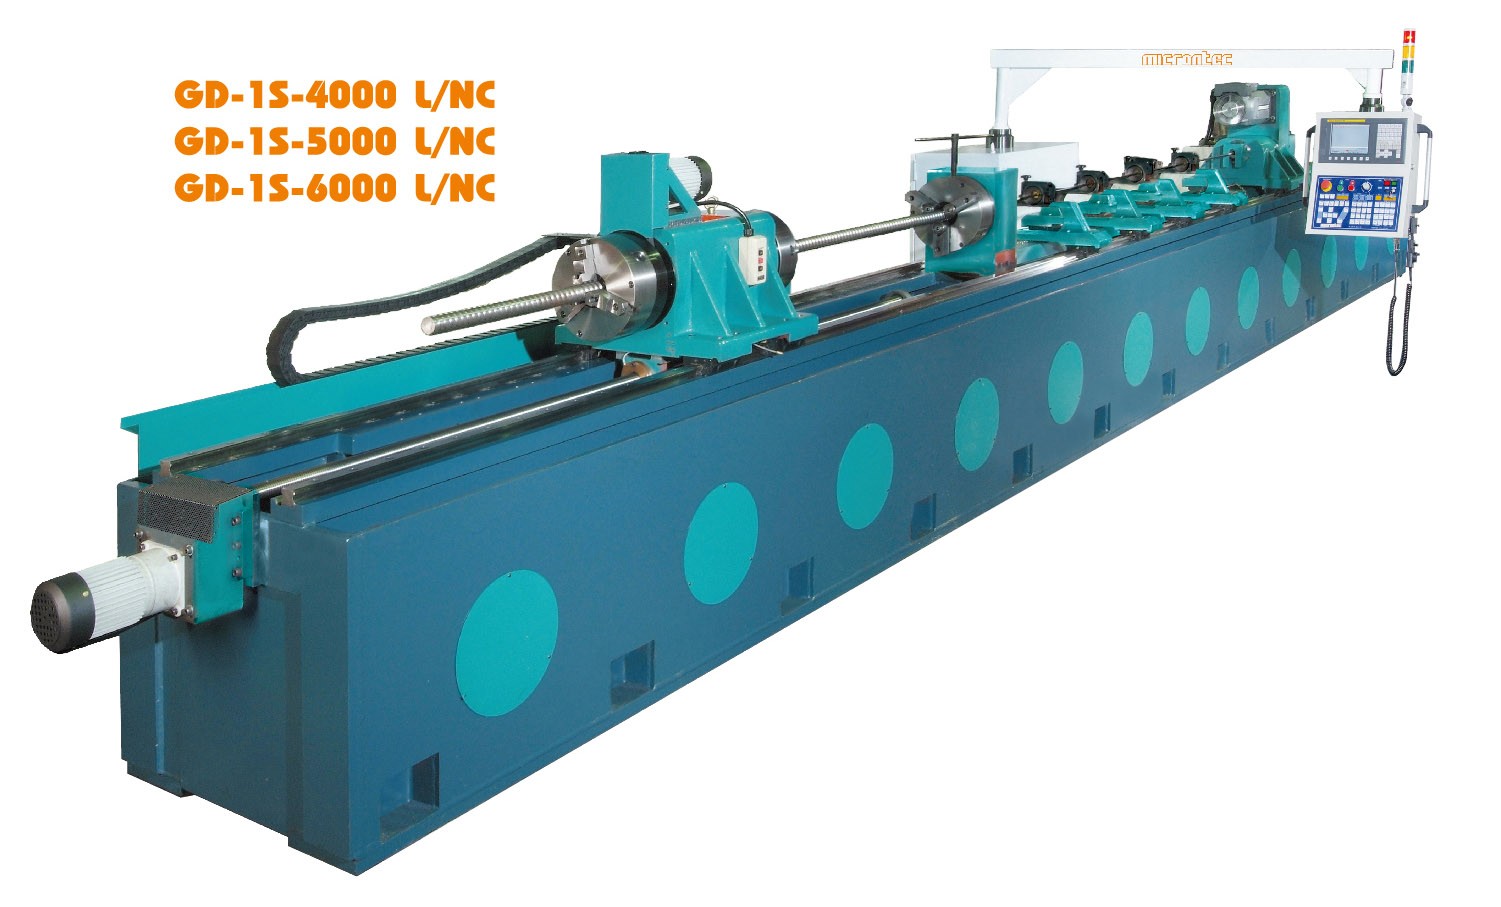 SINGLE SPINDLE LENGTHEN OVER BED TYPE – CENTER OF A CIRCLE DRILLING MACHINE SYSTEM-GD-1S-2000 L / NC